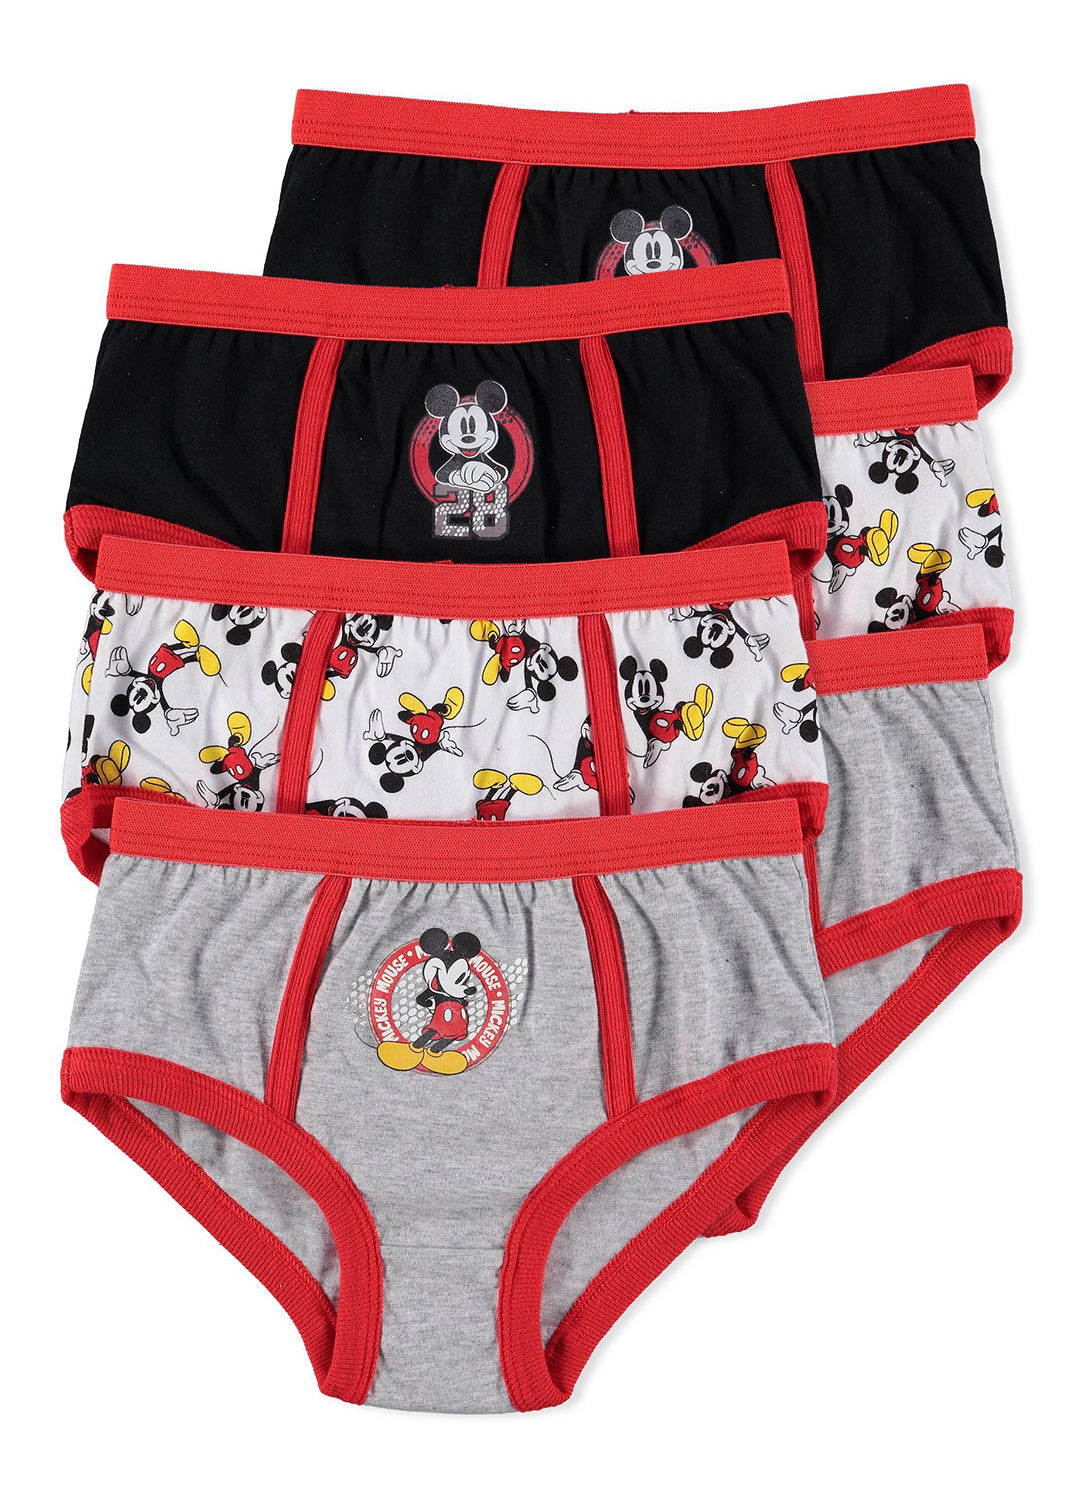 6 Boys briefs with Mickey Mouse prints